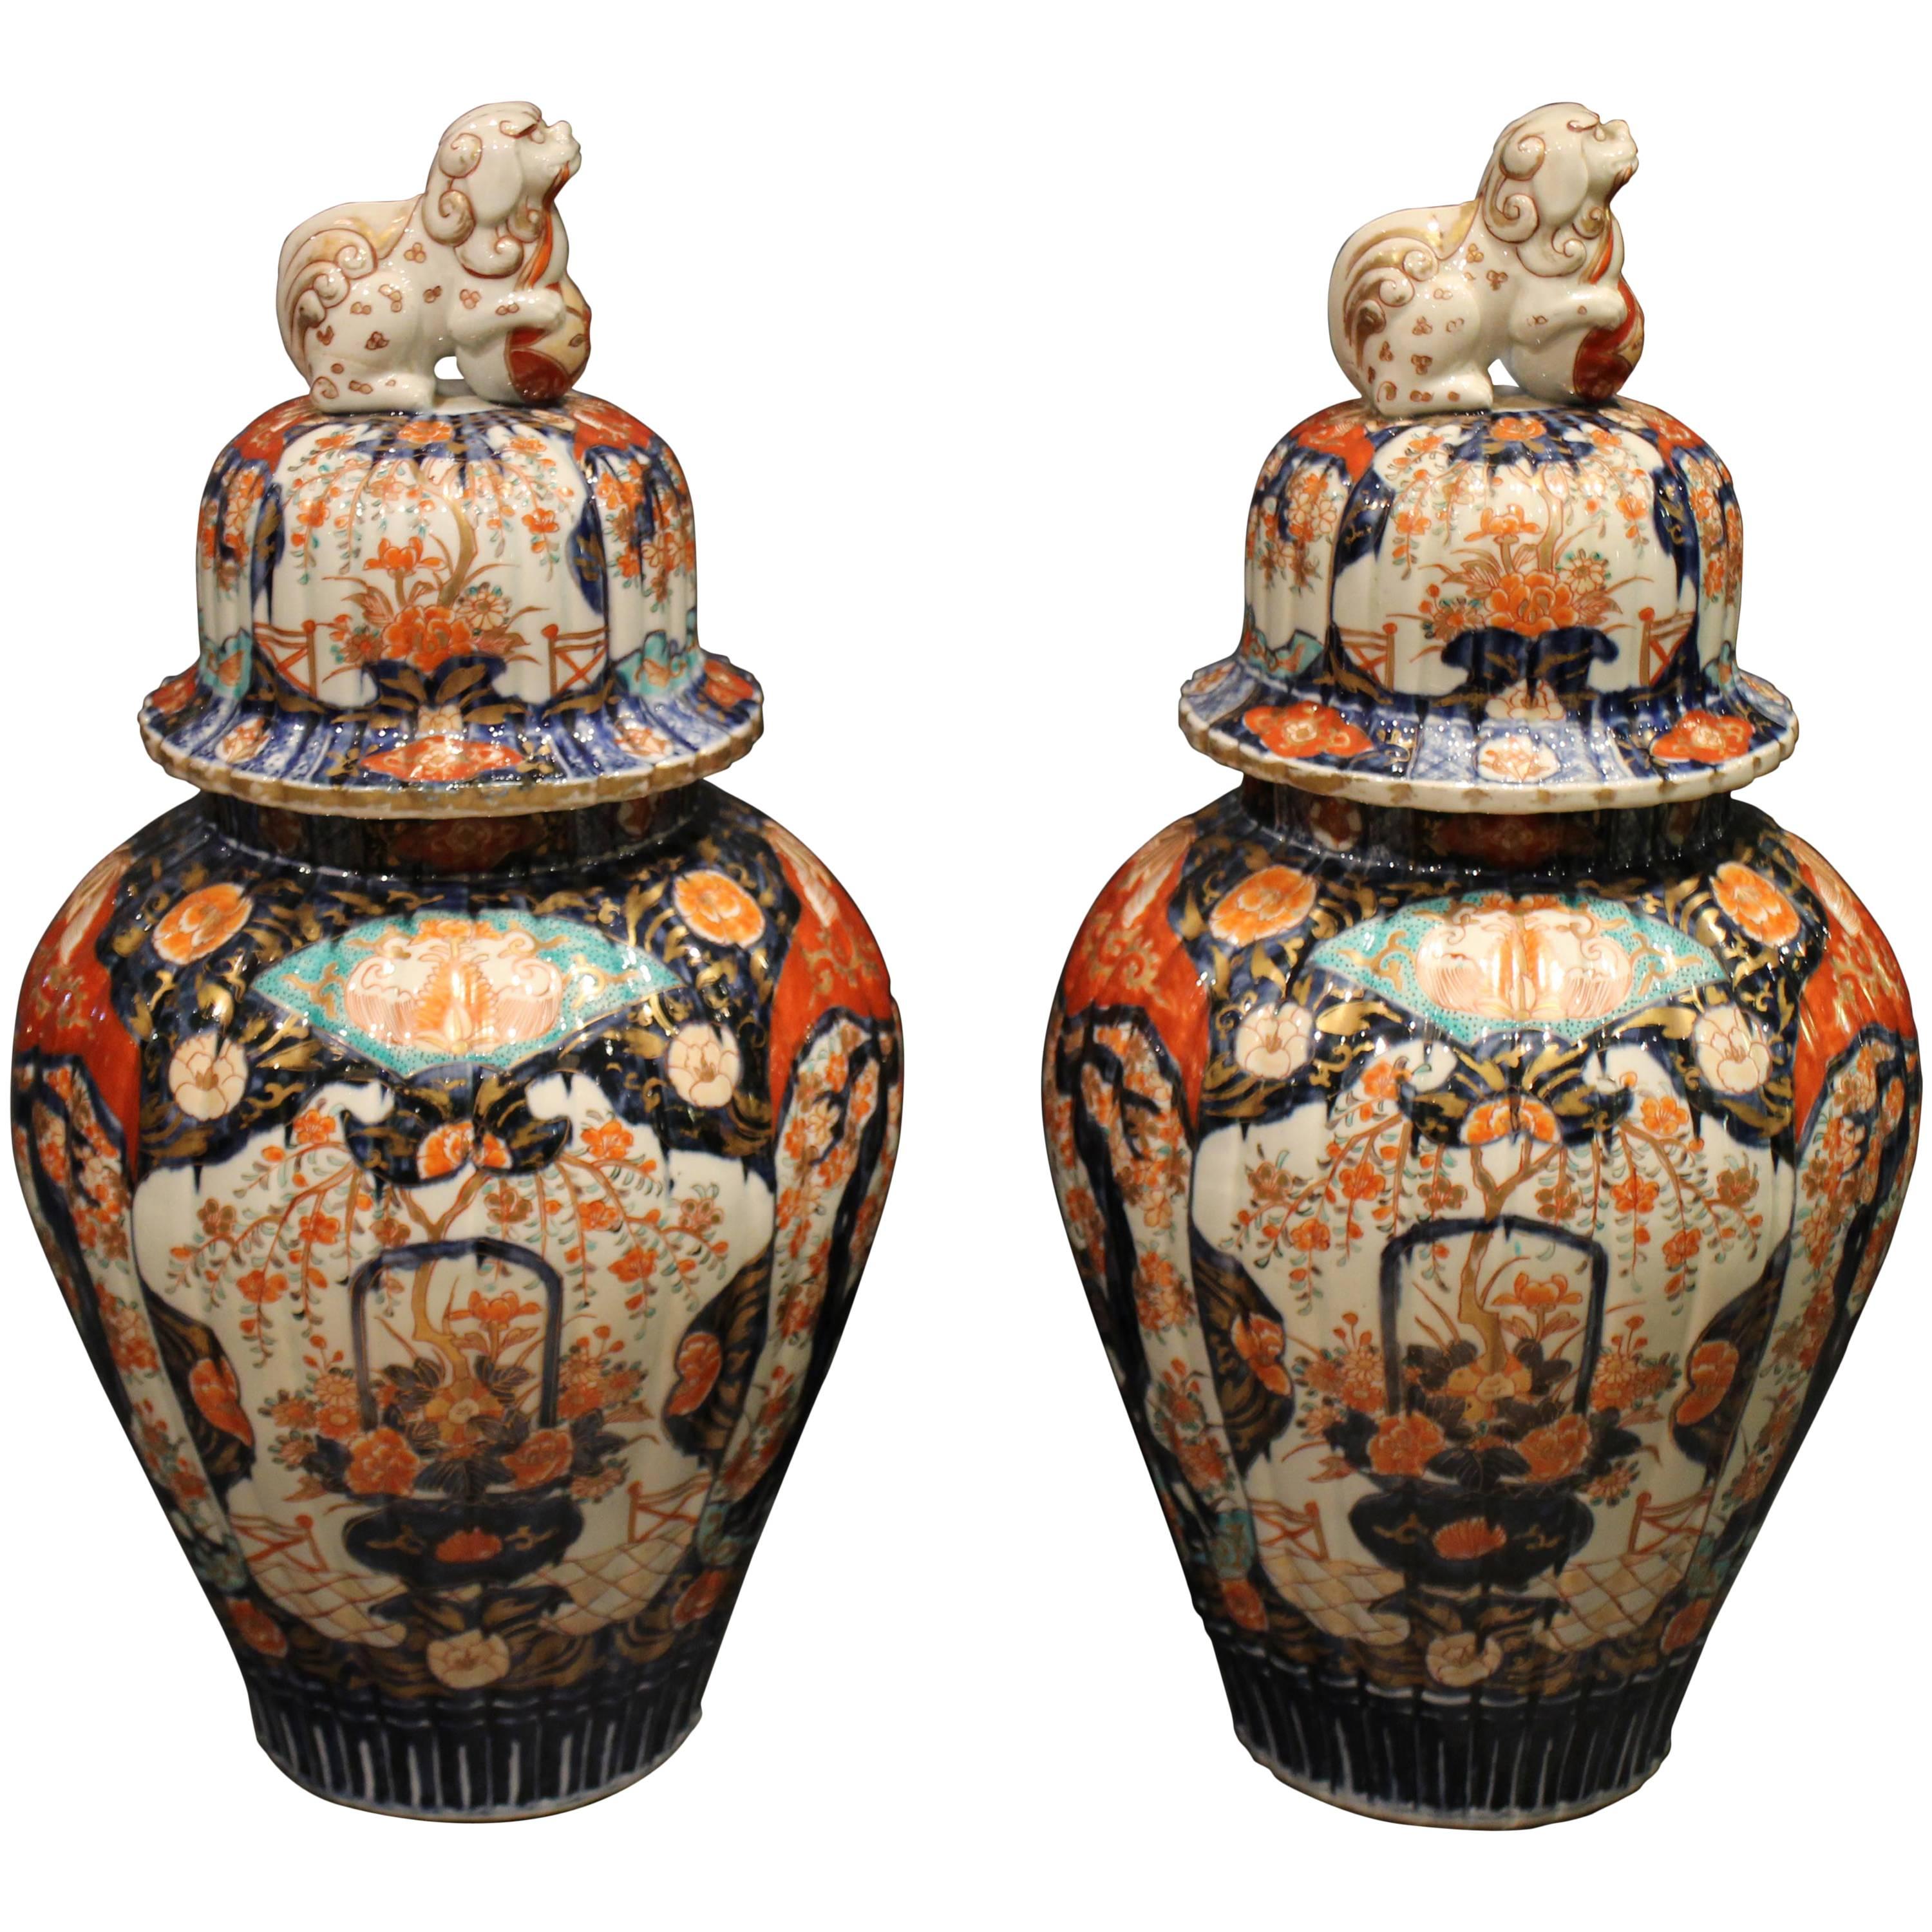 Pair of Antique Japanese Imari Vases and Covers Decorated in Blue and Orange